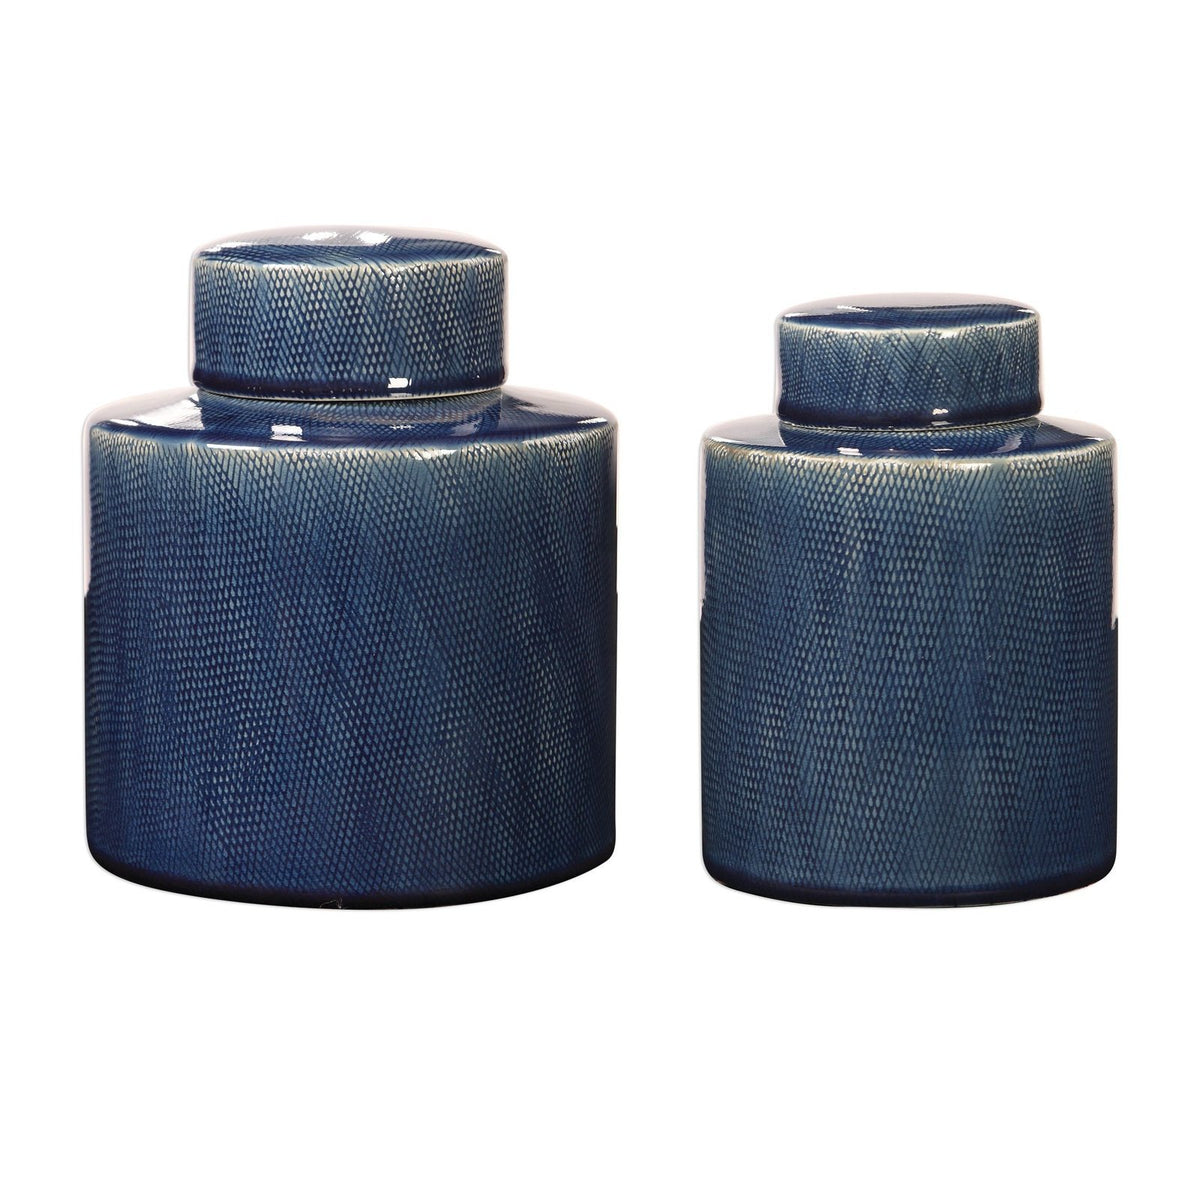 Uttermost Saniya Blue Containers (Set of 2)